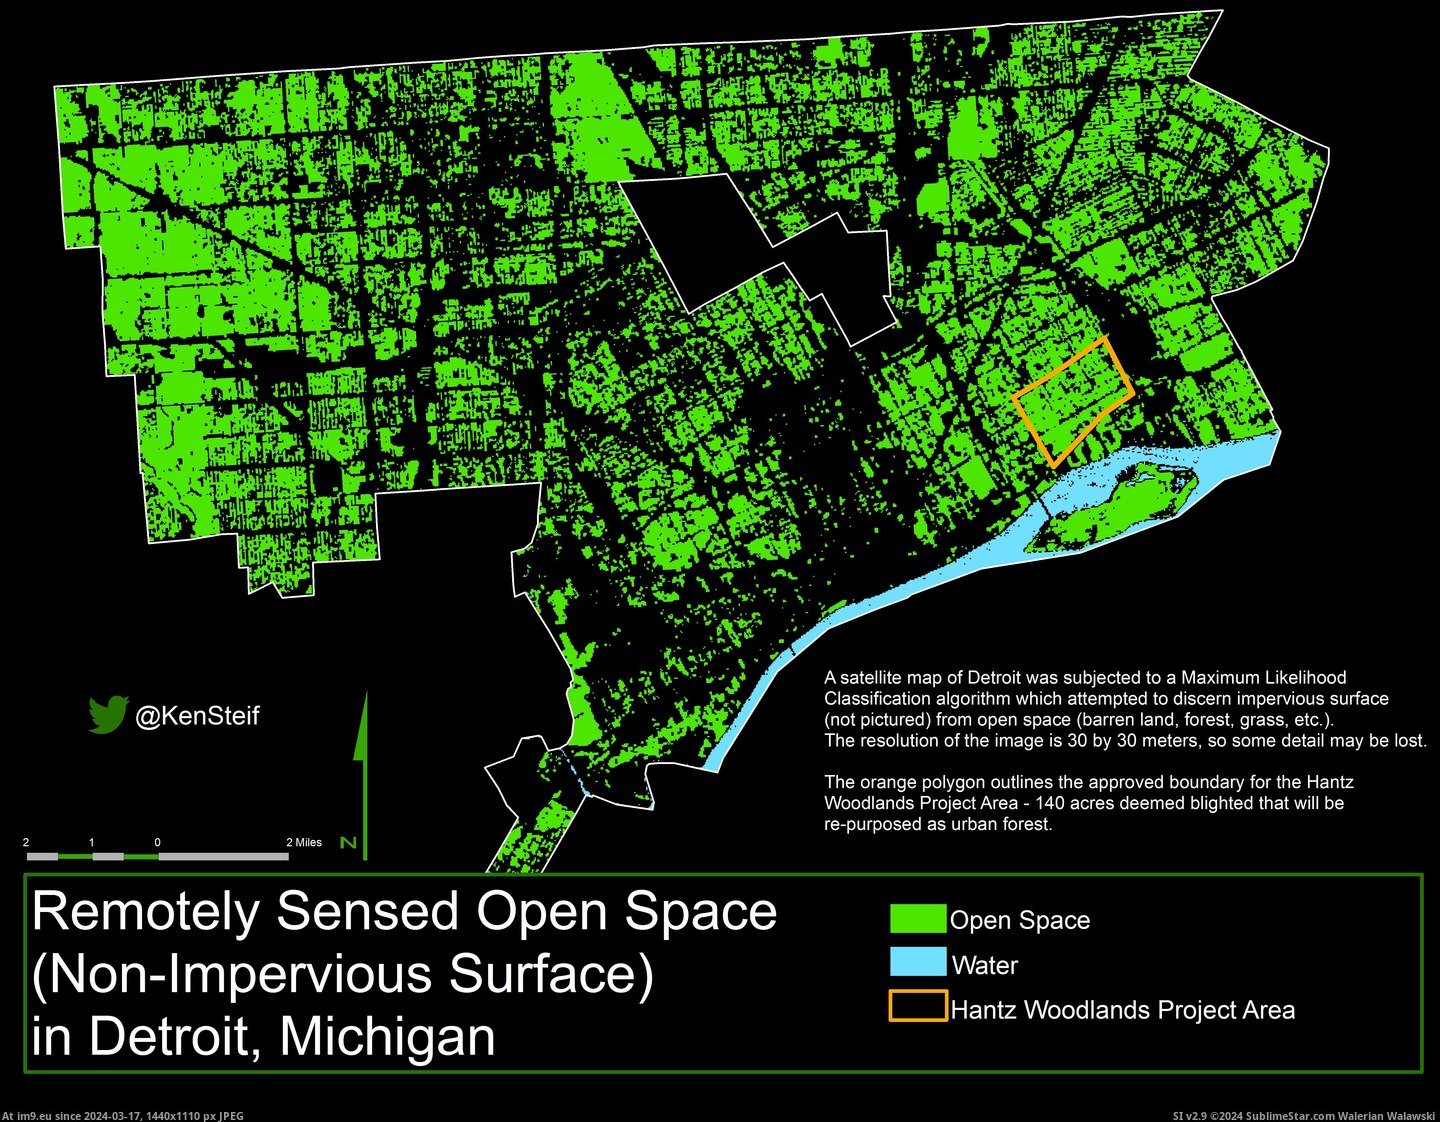 #Space #Detroit #Vacant #Land [Mapporn] Open Space-Vacant Land in Detroit [850 x 650] Pic. (Image of album My r/MAPS favs))